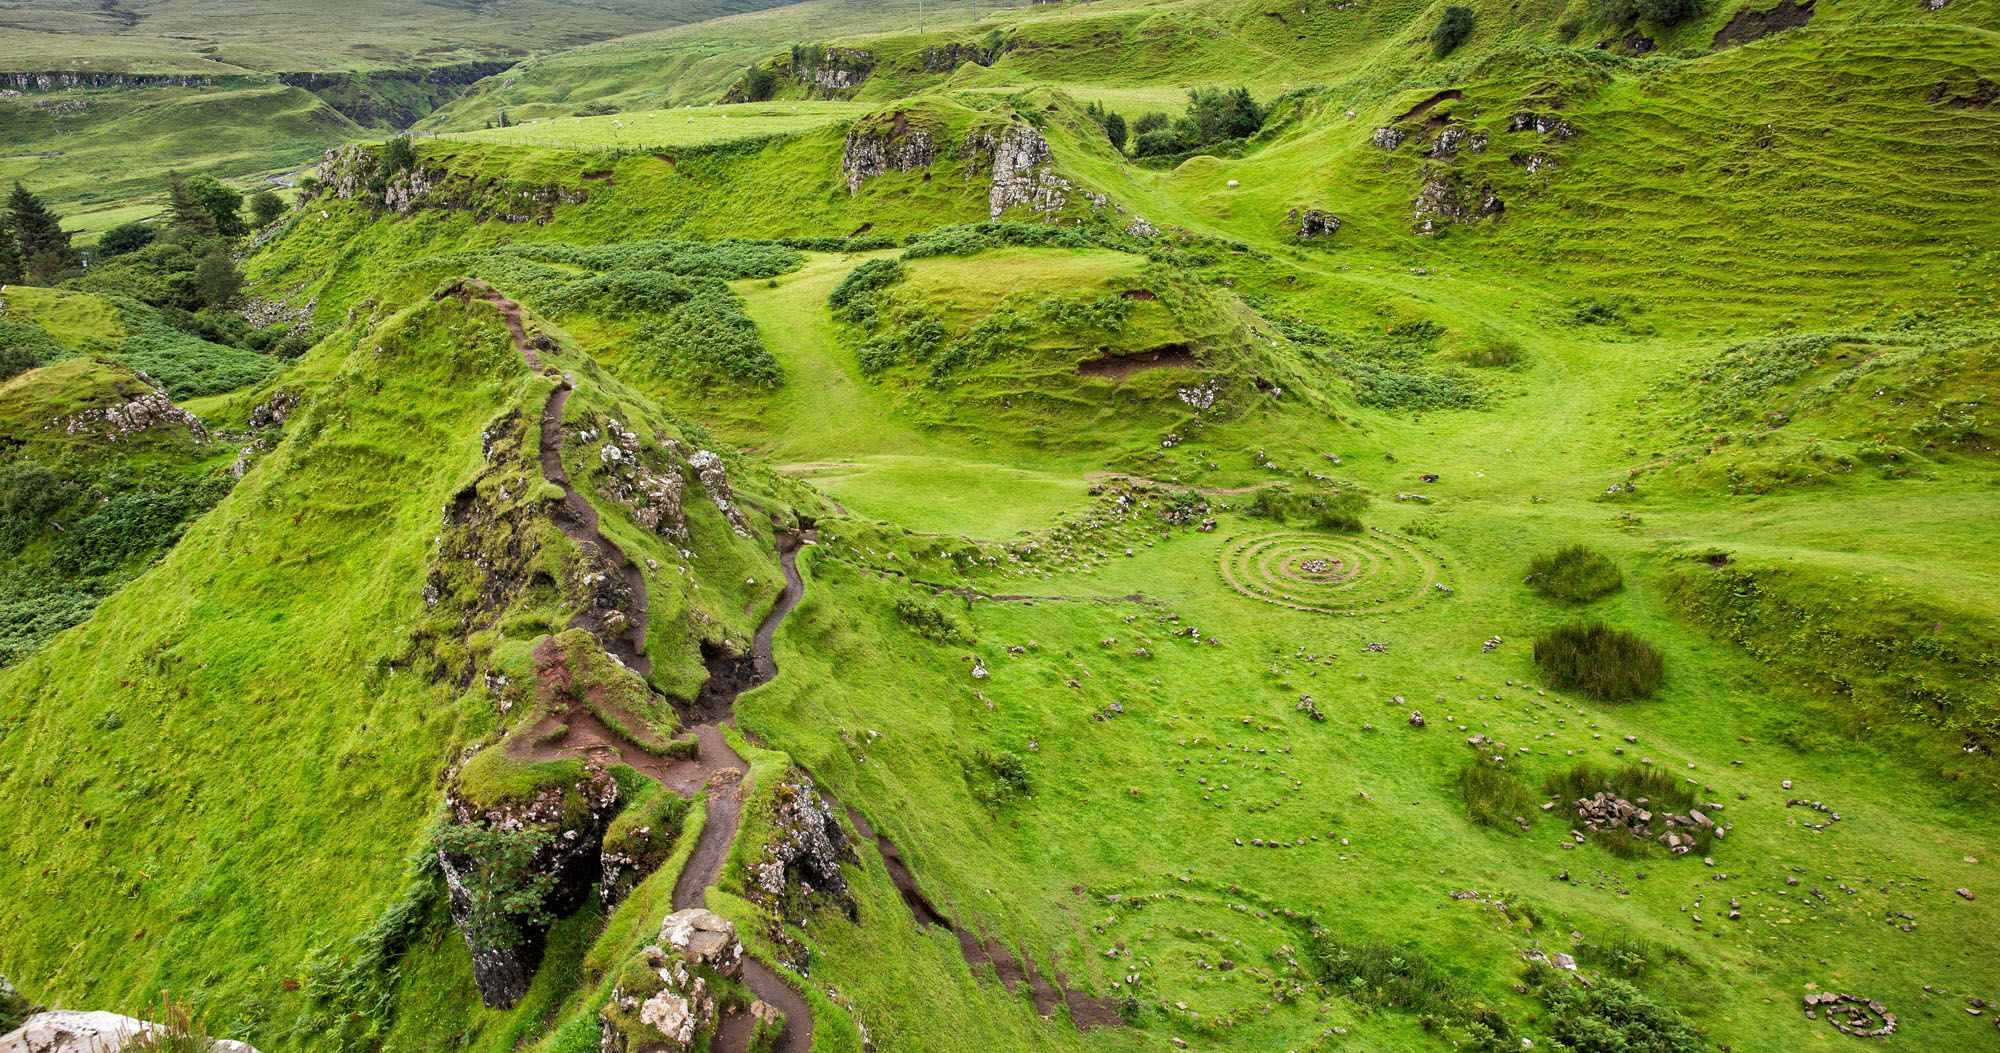 Featured image for “Fairy Glen: The Cutest Place to Explore on the Isle of Skye”